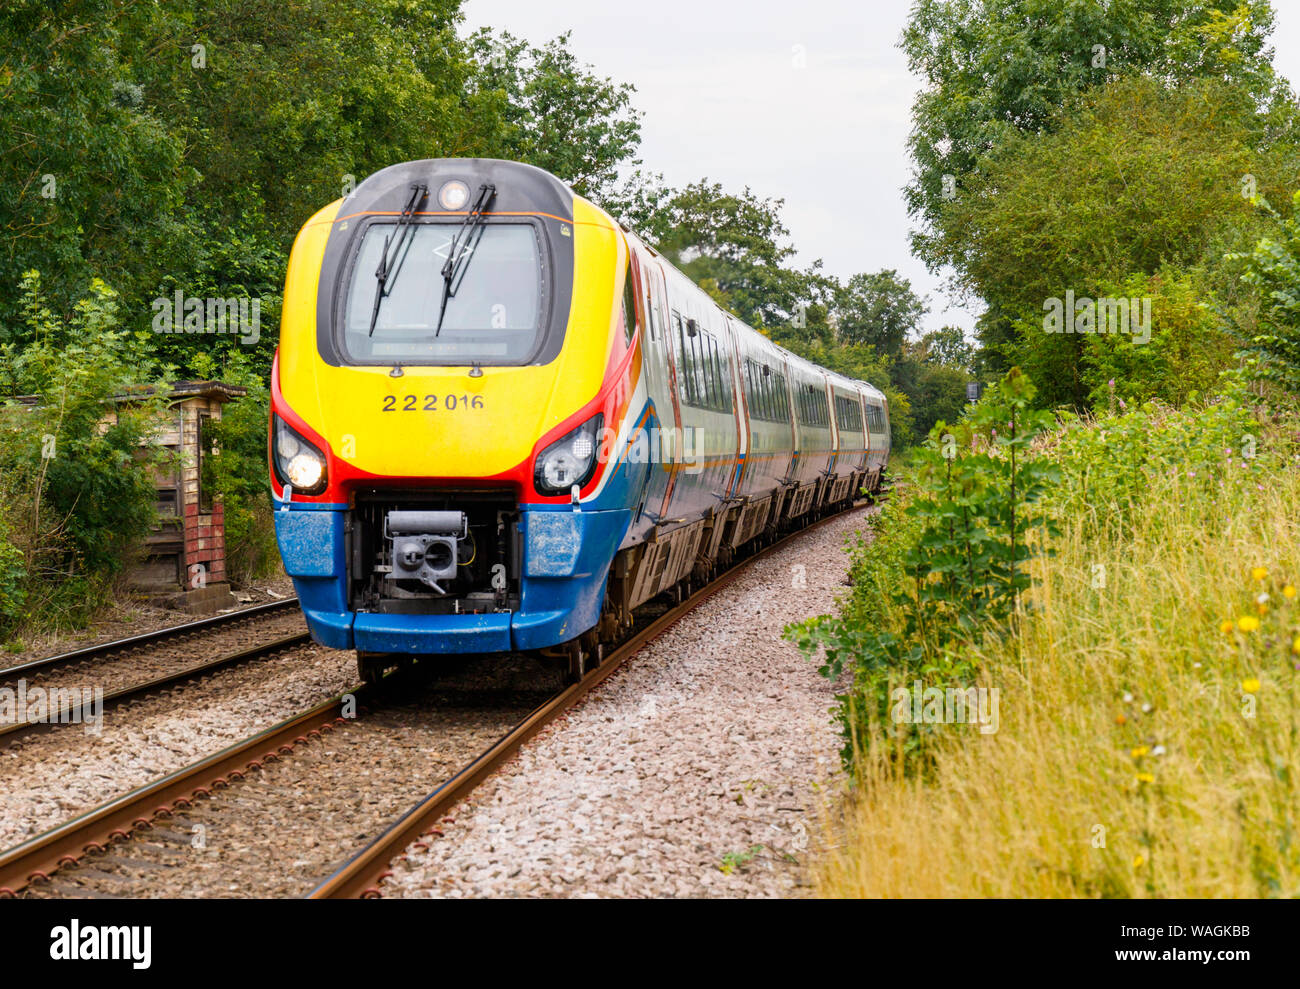 East Midlands Trains. Class 222 Meridian diesel-electric-multiple-unit  high speed train. Between Melton Mowbray and Oakham. Now East Midlands Railway Stock Photo